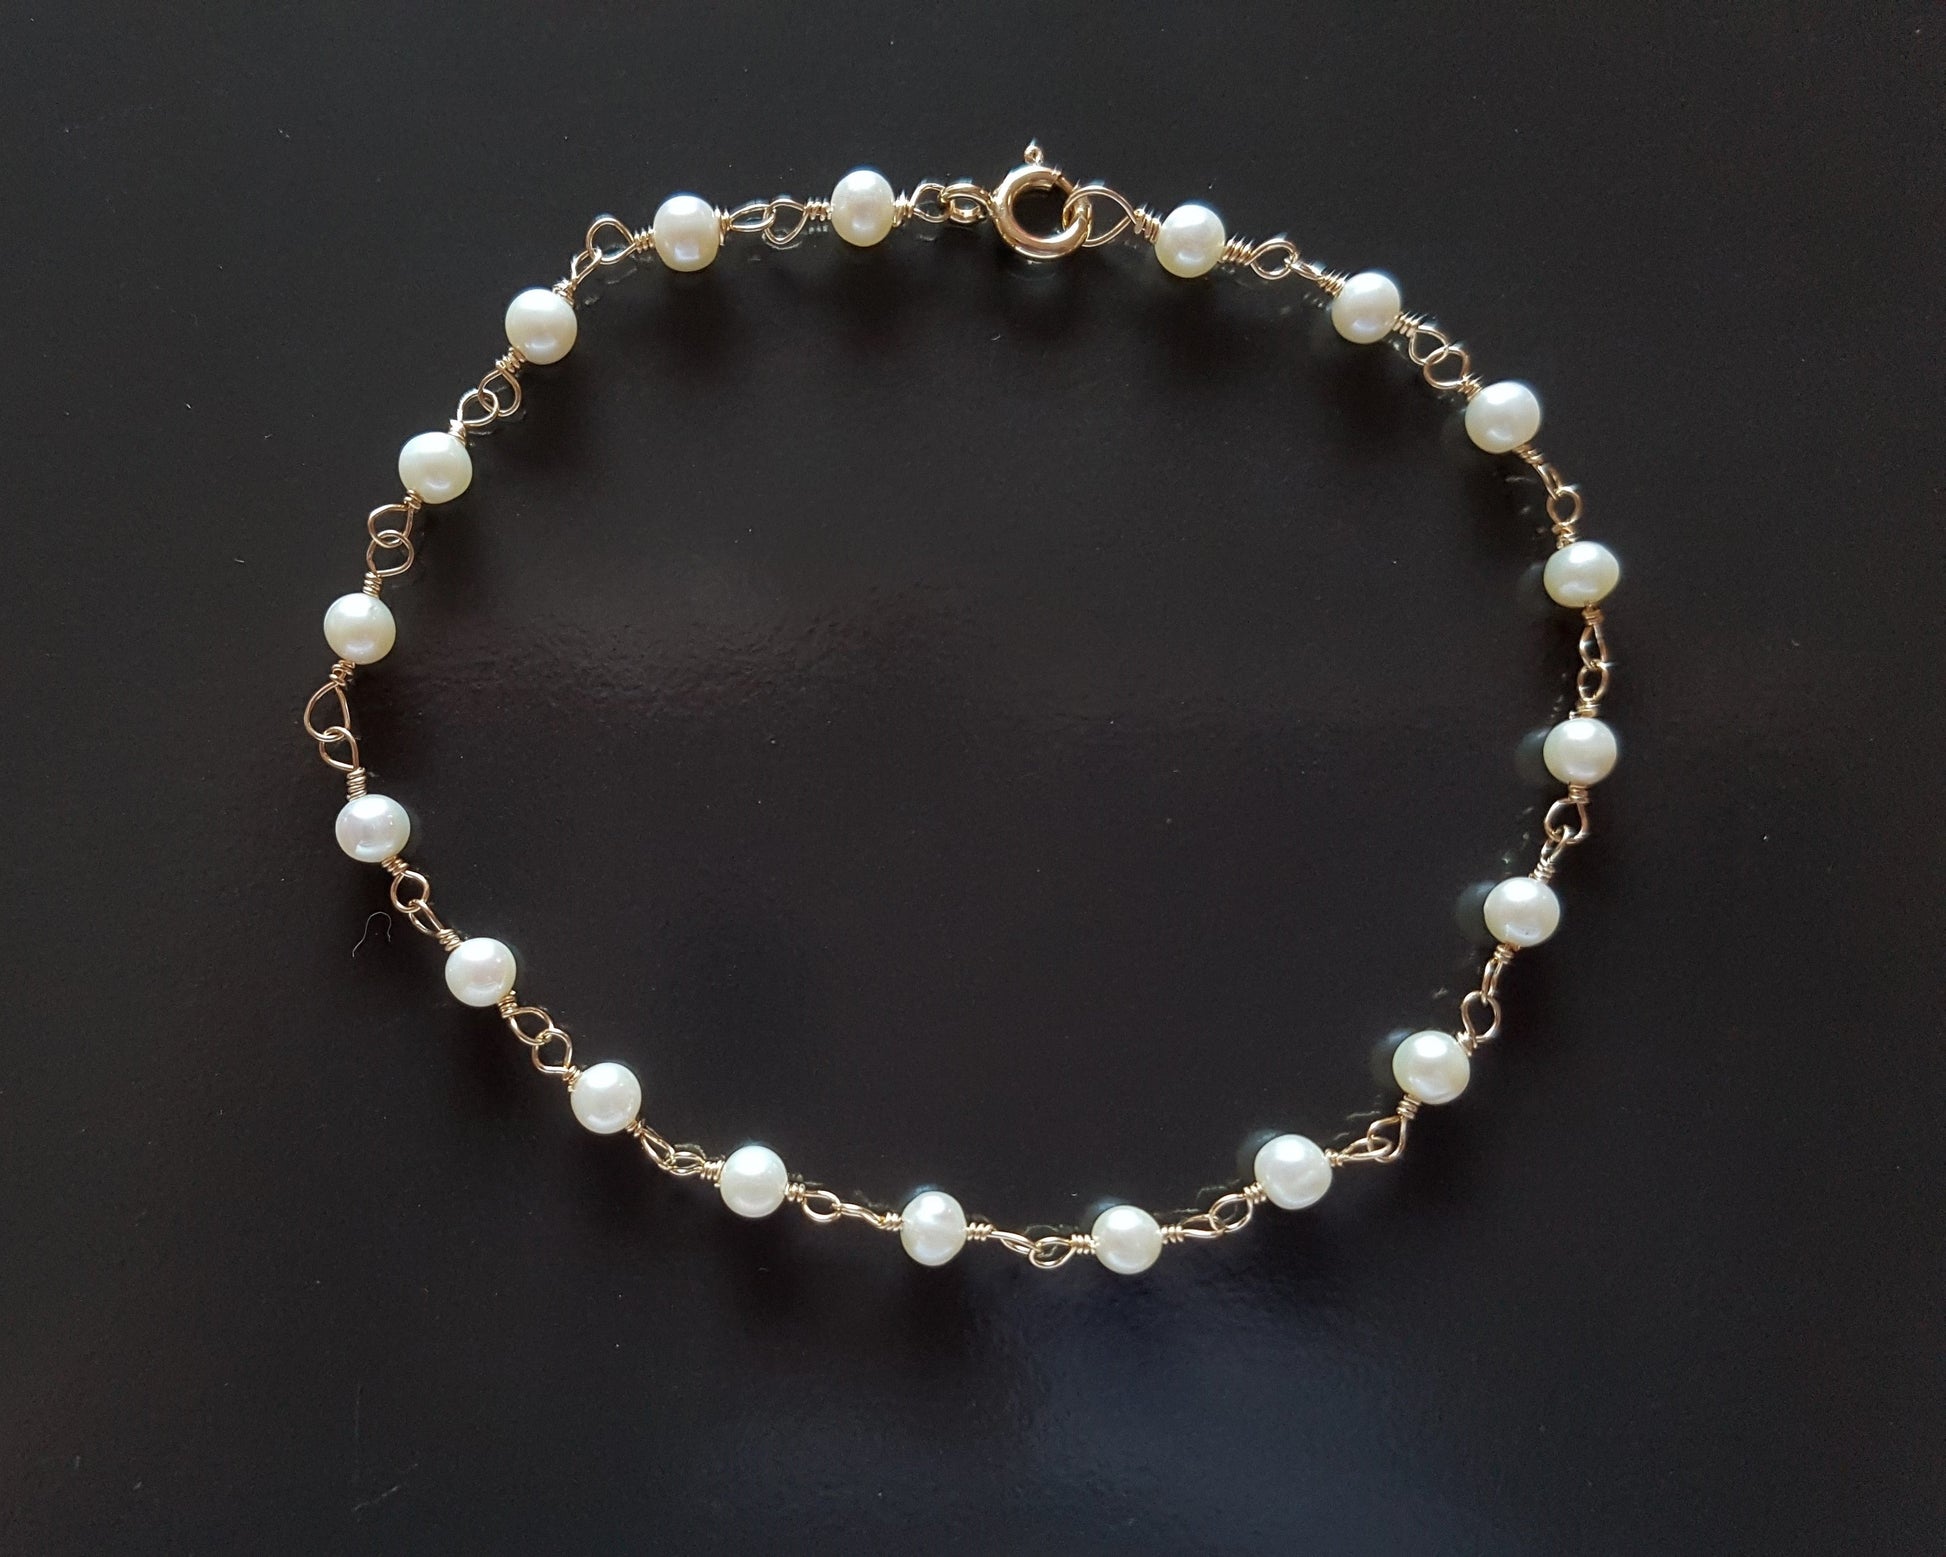 Deluxe Freshwater Cultured Pearl Anklet-Ankle Bracelet-14k Gold Filled-Wire Wrapped White Pearls